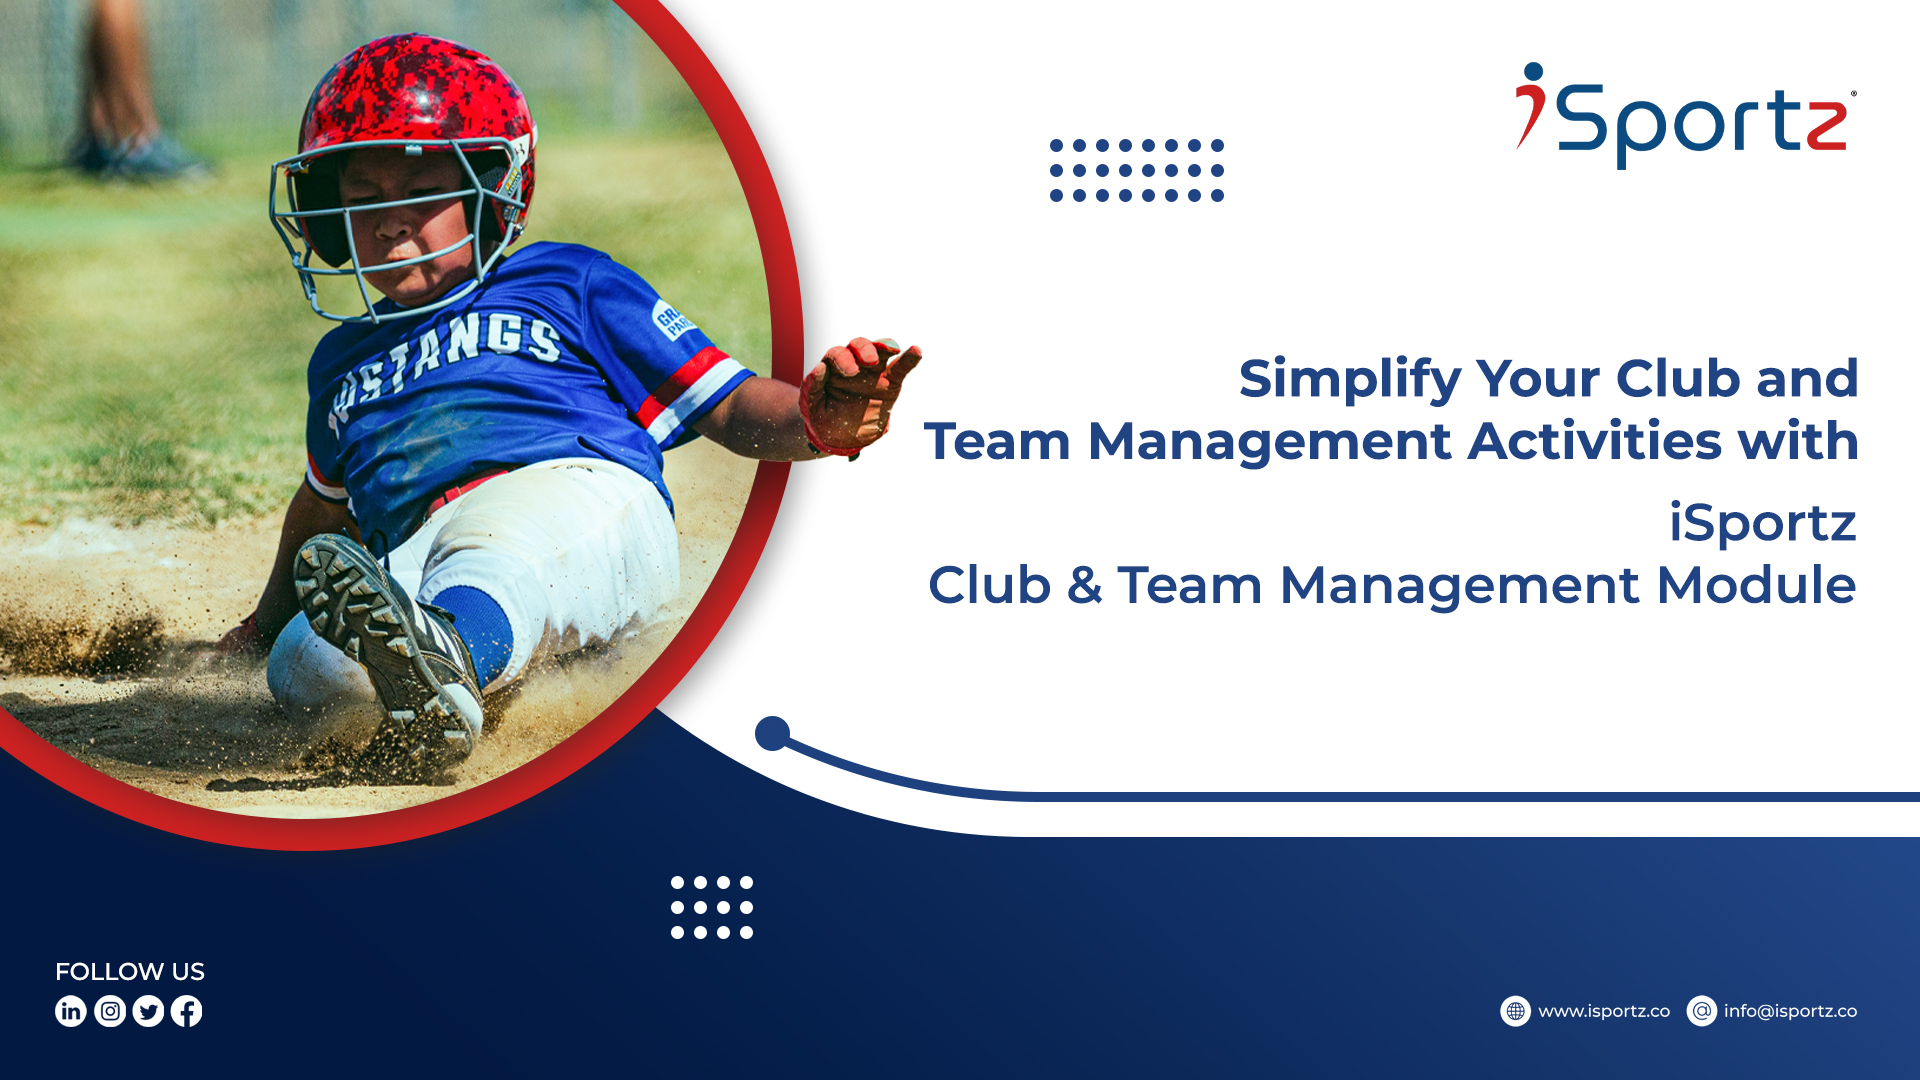 Kid playing baseball, trying to score a run and the text on the right reads “Simplify Your Club and Team Management Activities with iSportz Club and Team Management Module”